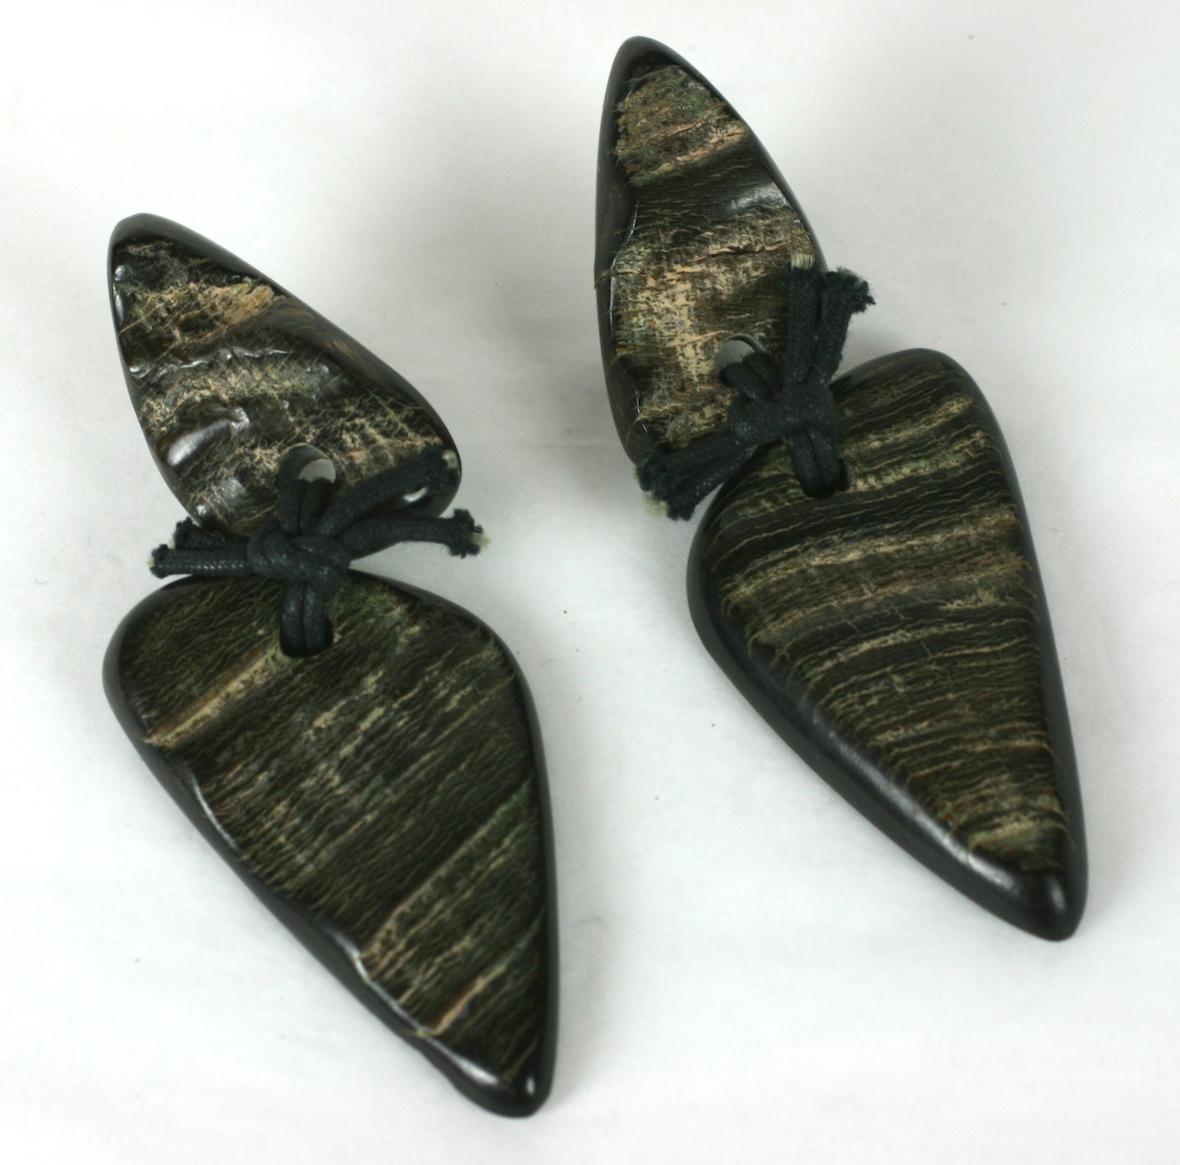 Monies Faux Horn Carved Statement Earrings. Resin is carved and treated to resemble faux horn and black waxed cord is used to attach the earring pendant to each top. Very lightweight and wearable.
1980's. Clip back fittings. Signed. Monies, Gerda